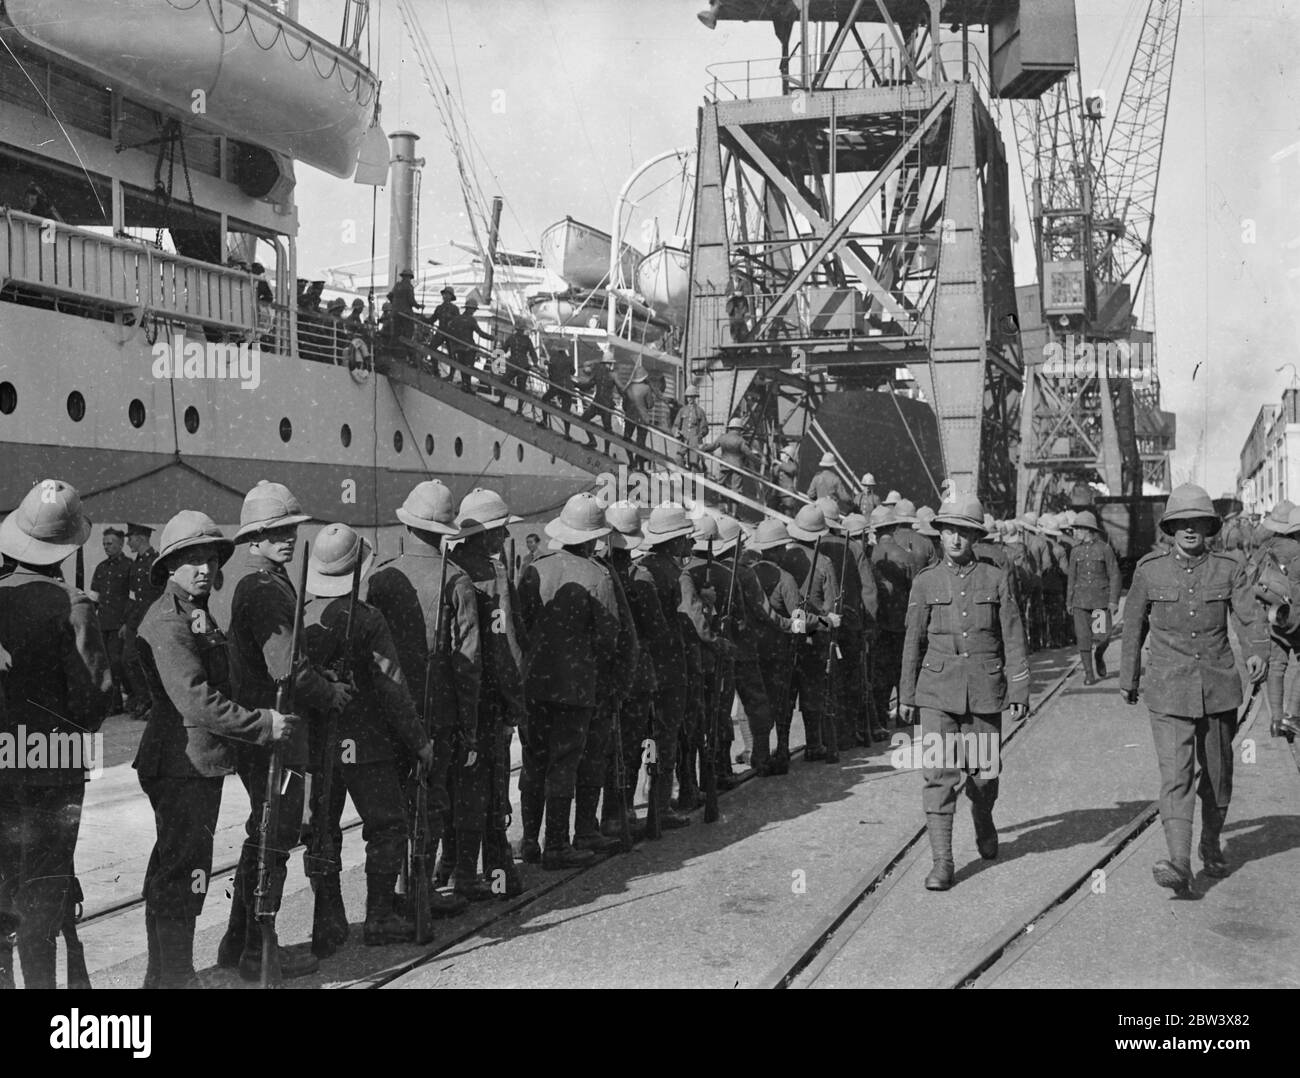 Two ships leave with troops for Palestine . Further detachment troops member of the Royal Ordinance Corps and the East Yorkshire's Regiment , left Southampton aboard the troopship Nevass and the liner Laurentic for Palestine . Photo shows , men of the East Yorkshire Regiment handing up their kit on Nevass as the Royal Army ordnance court attachment marches past to the Laurentic . 14 September 1936 Stock Photo